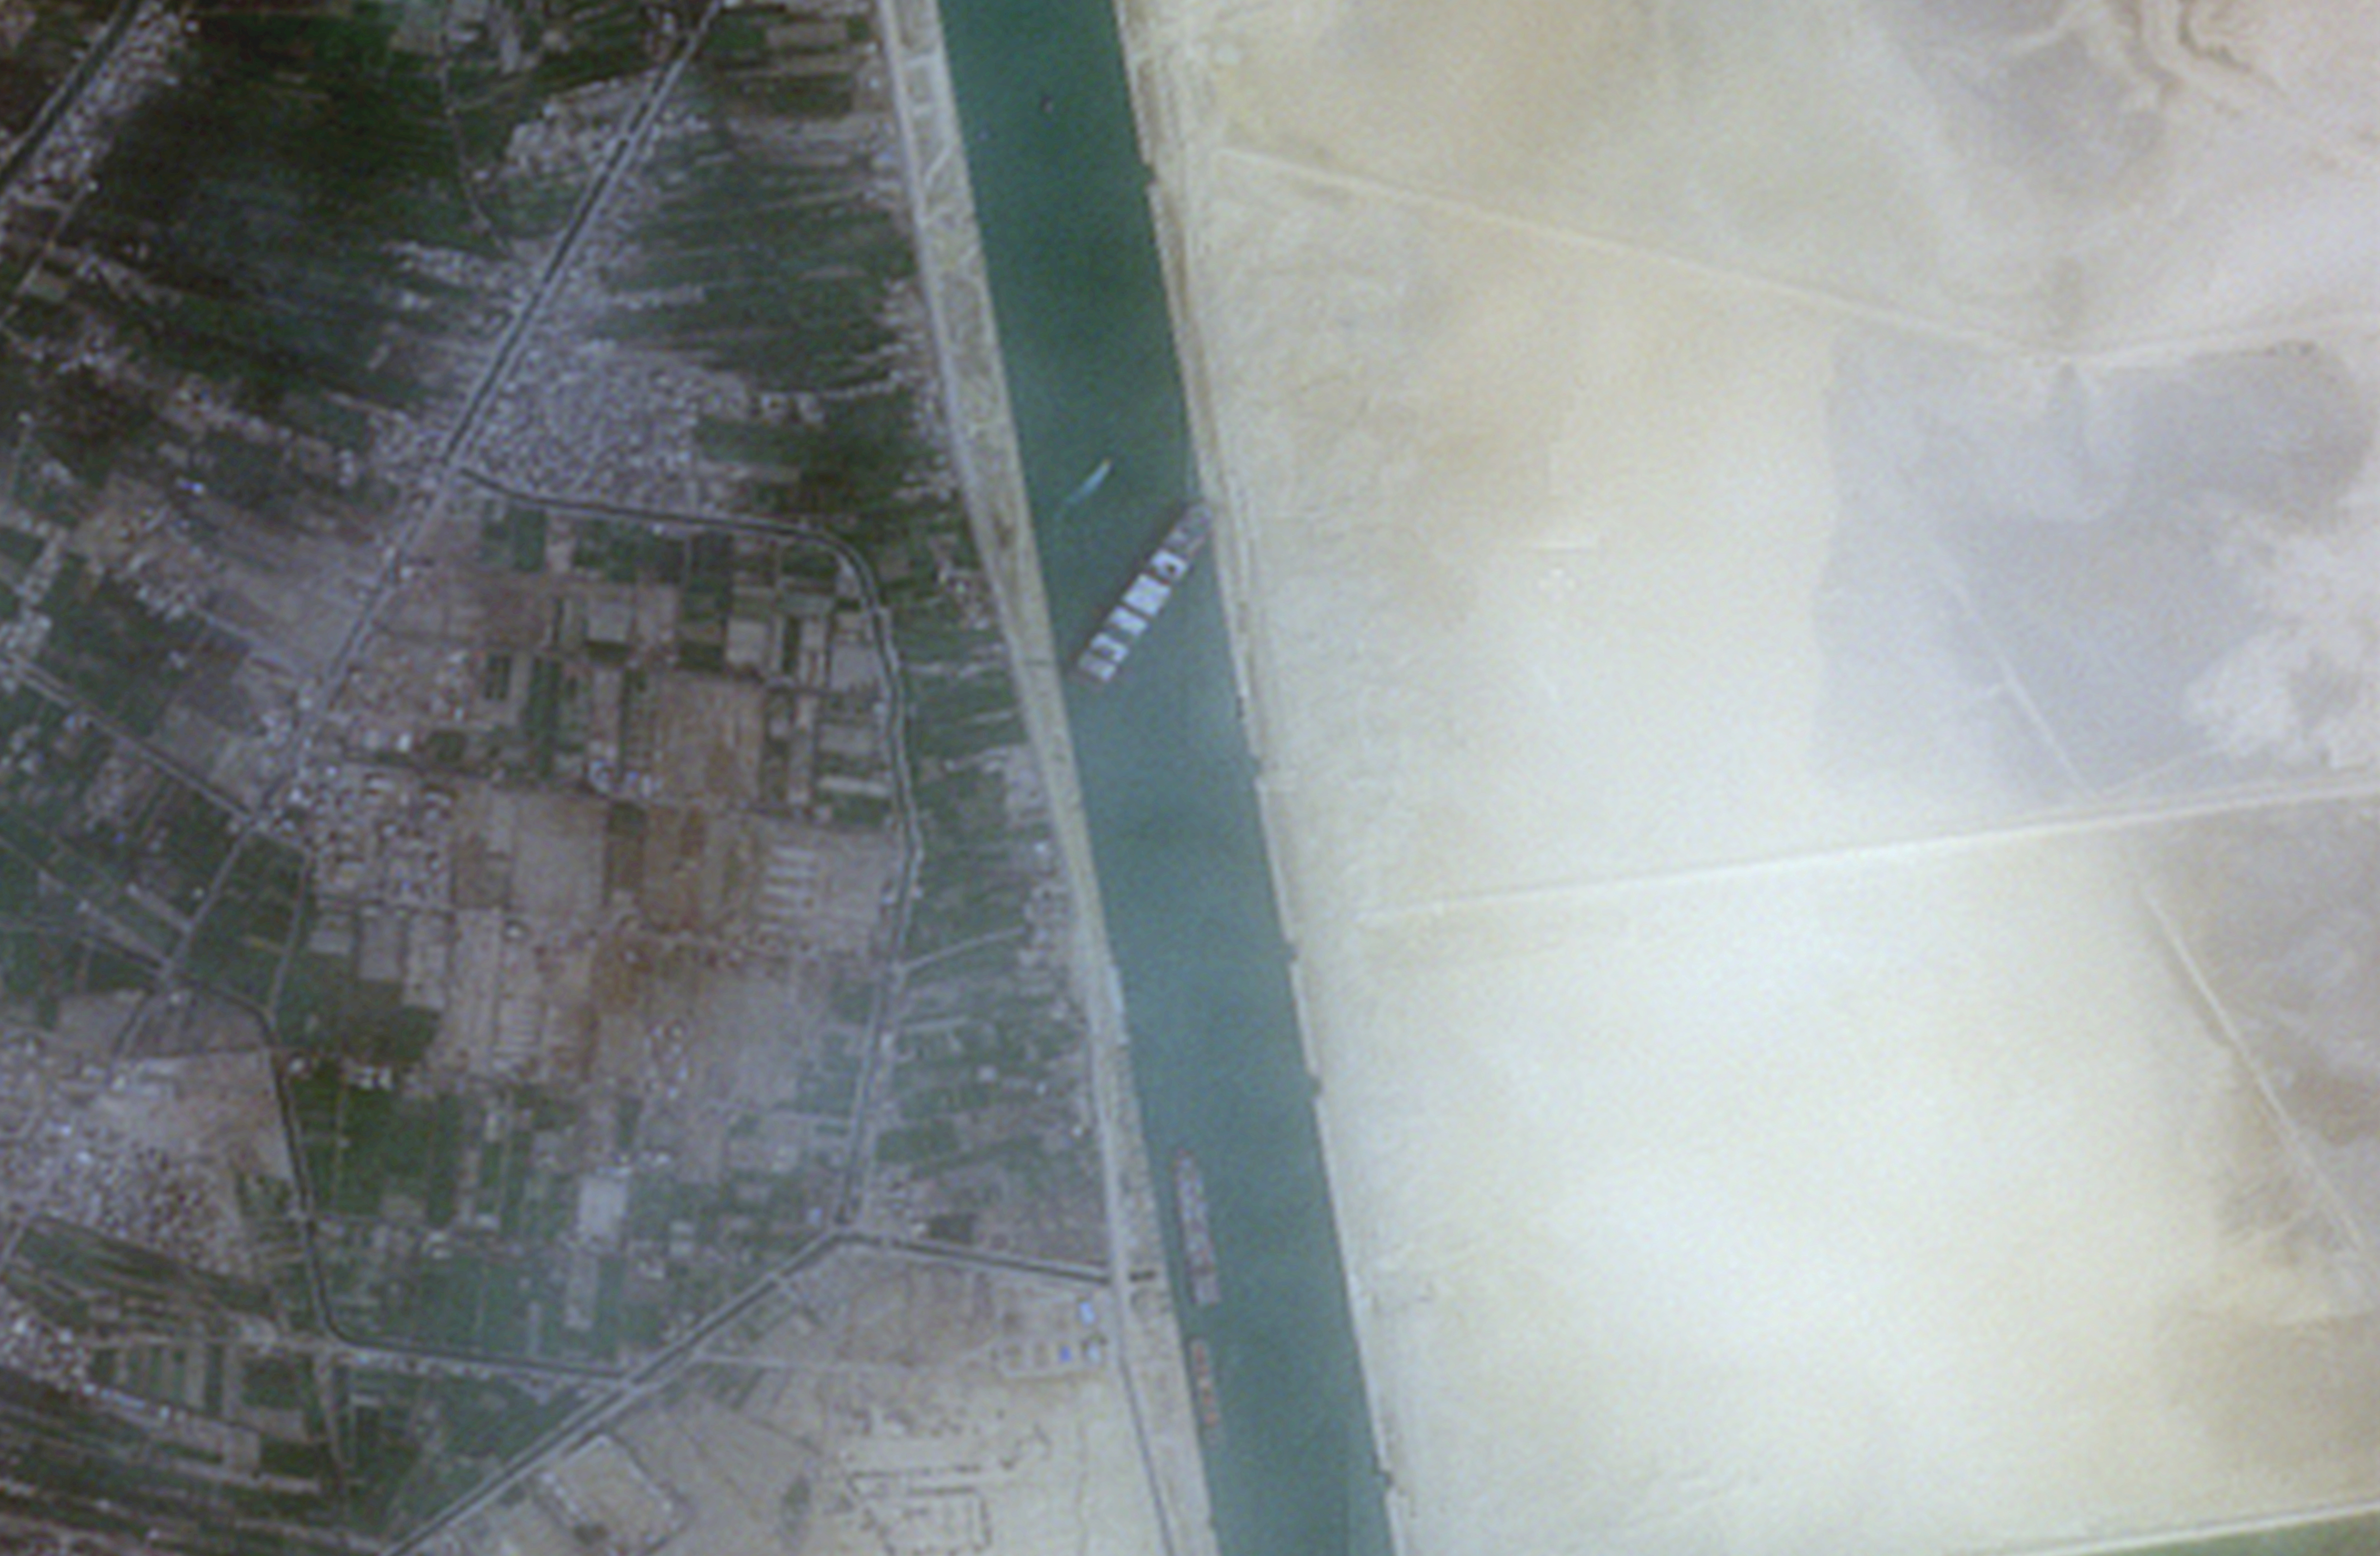 A closer view of the 400-meter, 224,000-tonne Ever Given container ship, leased by Taiwan's Evergreen Marine Corp, seen blocking the Suez Canal in this European Space Agency Copernicus Sentinel-2 satellite Image